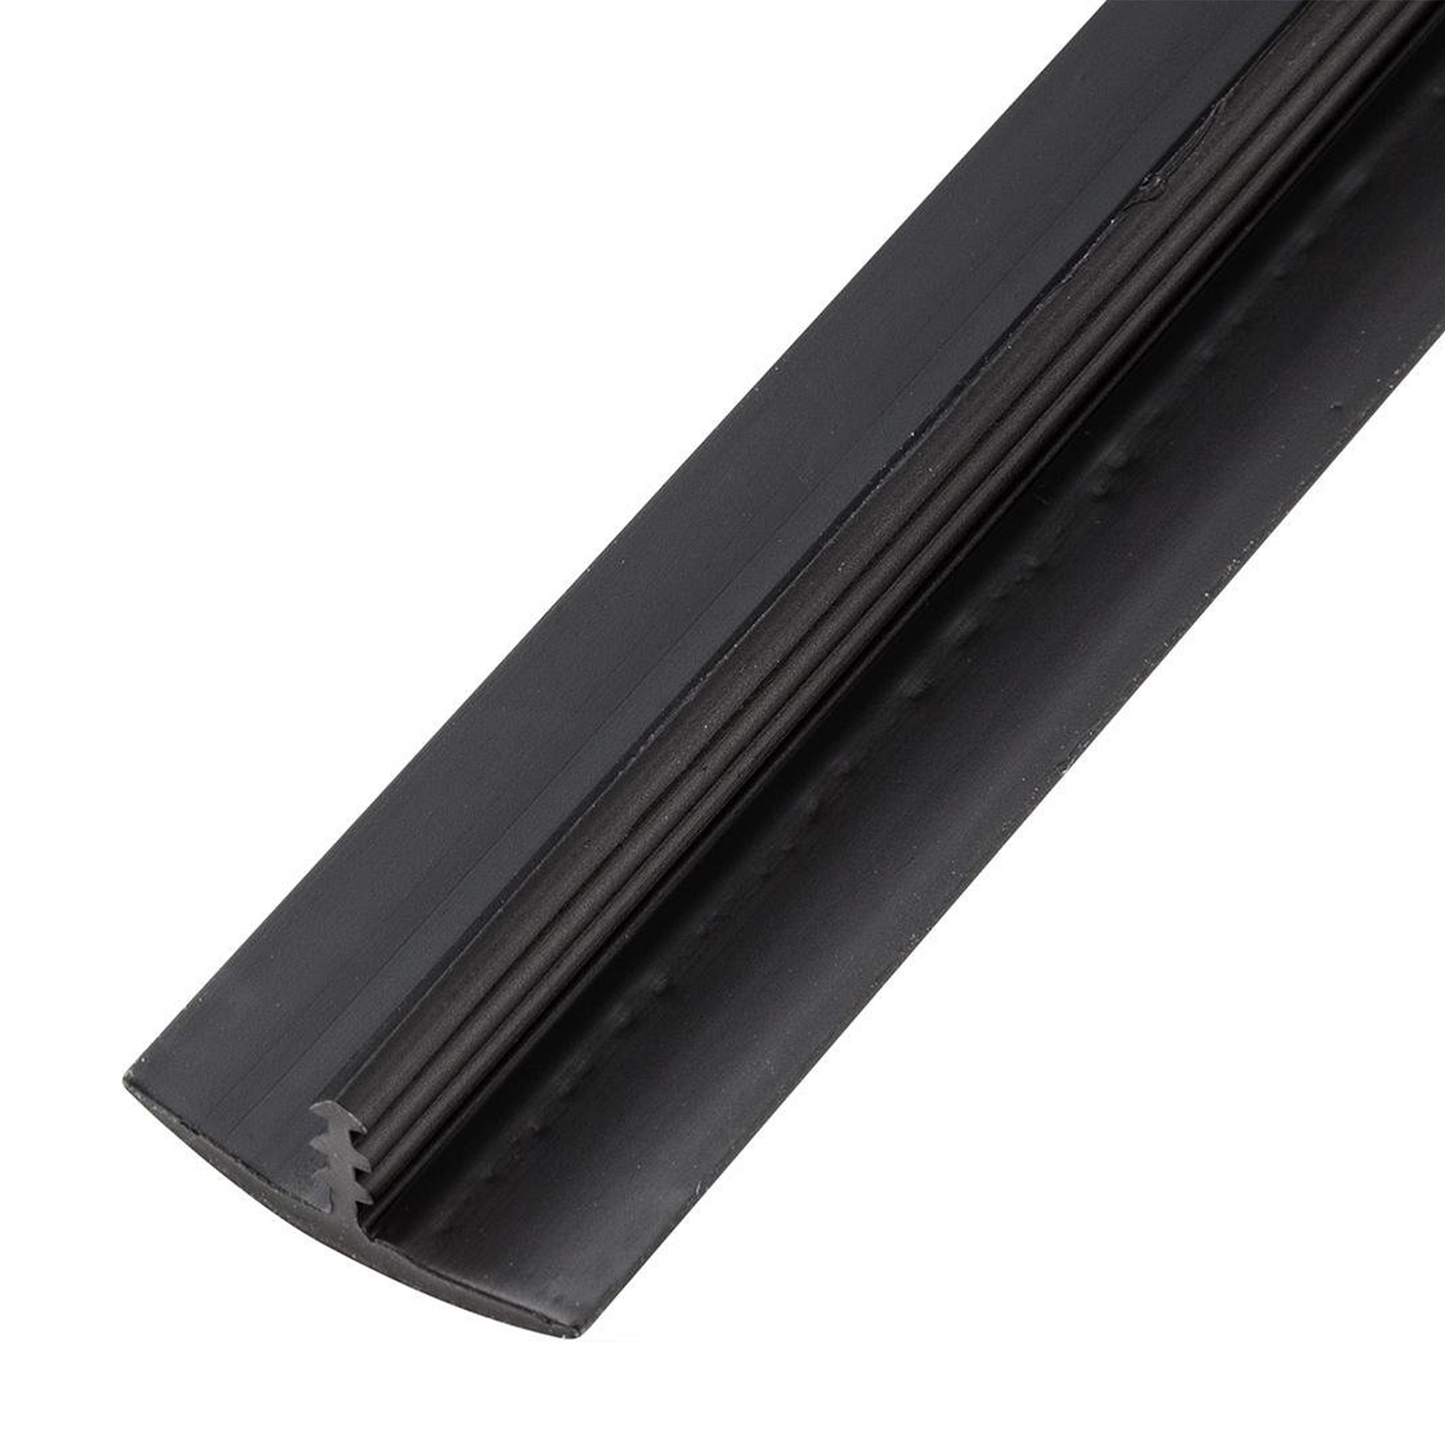 This black, 1’L x ¾”W, T-Molding features a metallic center strip and comes as one piece based on quantity ordered. 1’L x 3/4"W. Sold by Miele Manufacturing.